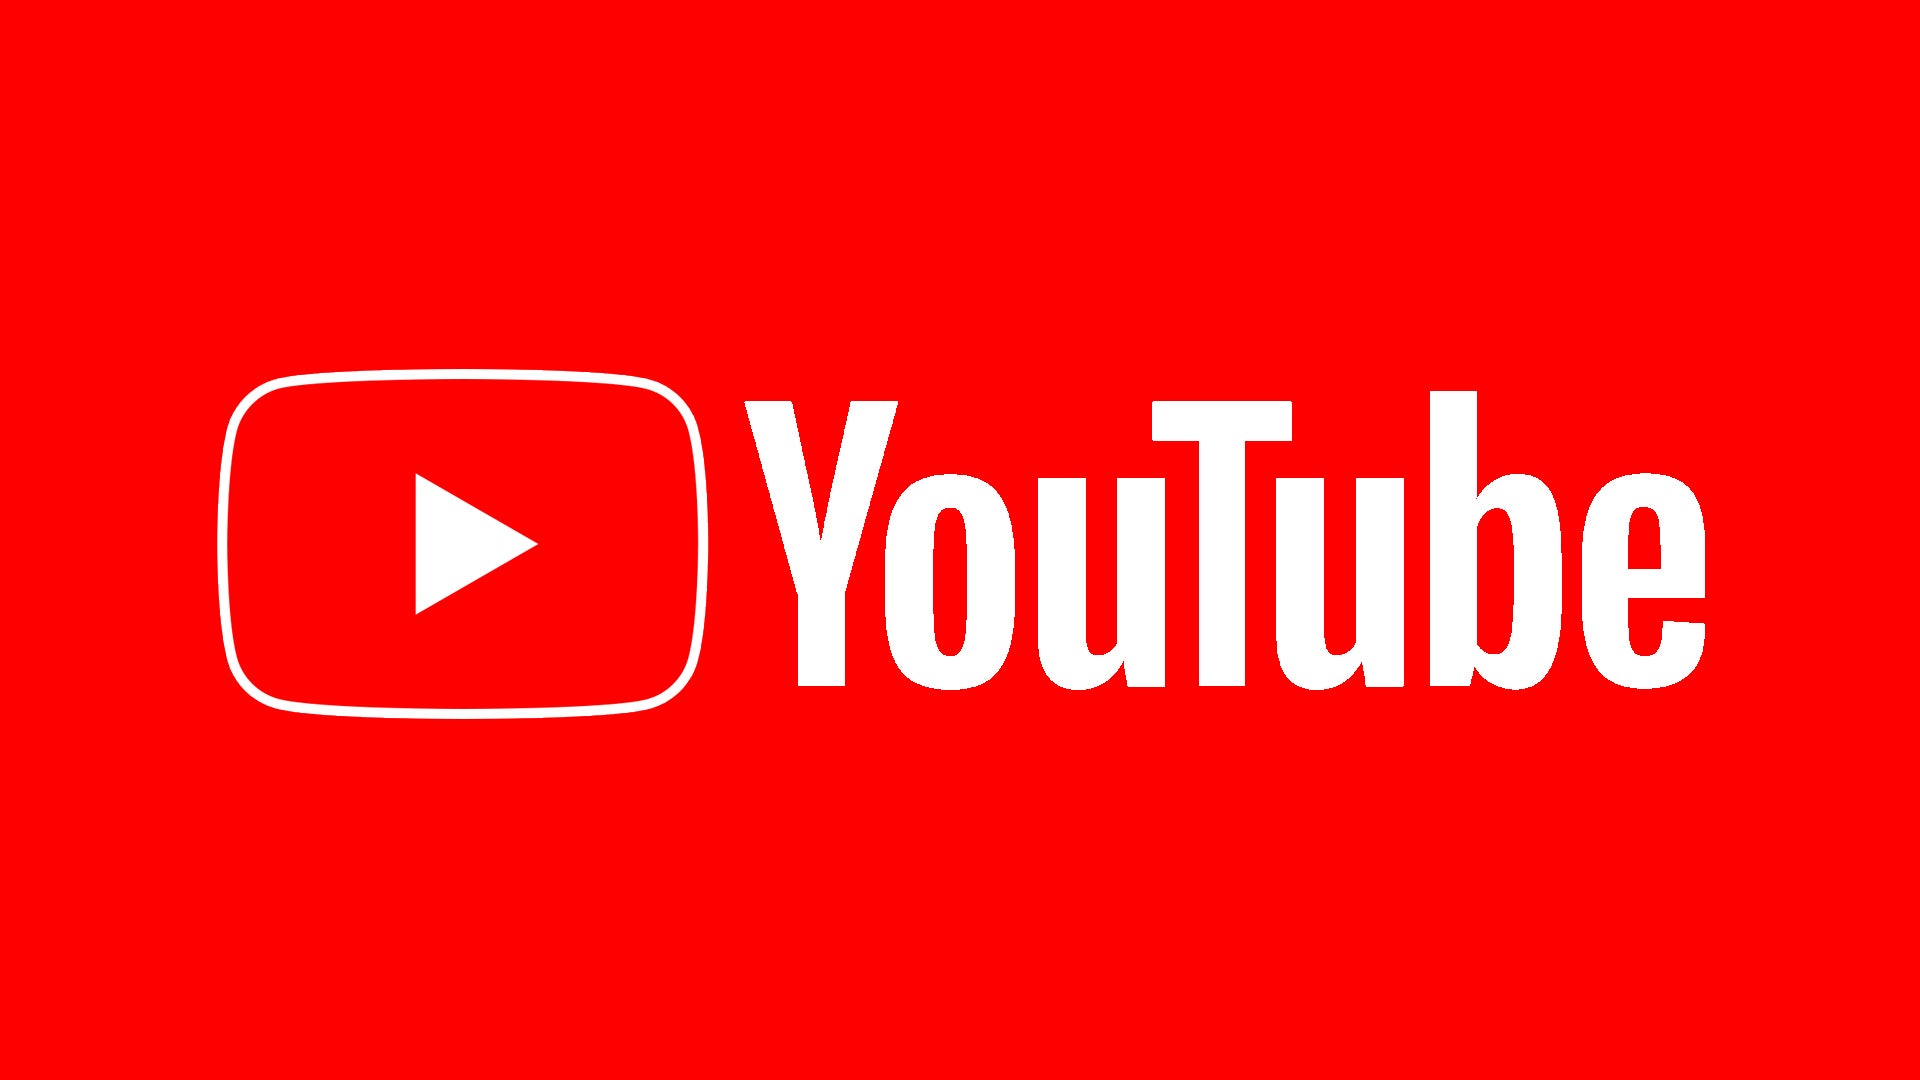 youtube-will-no-longer-publicly-show-dislikes-on-videos_s19g